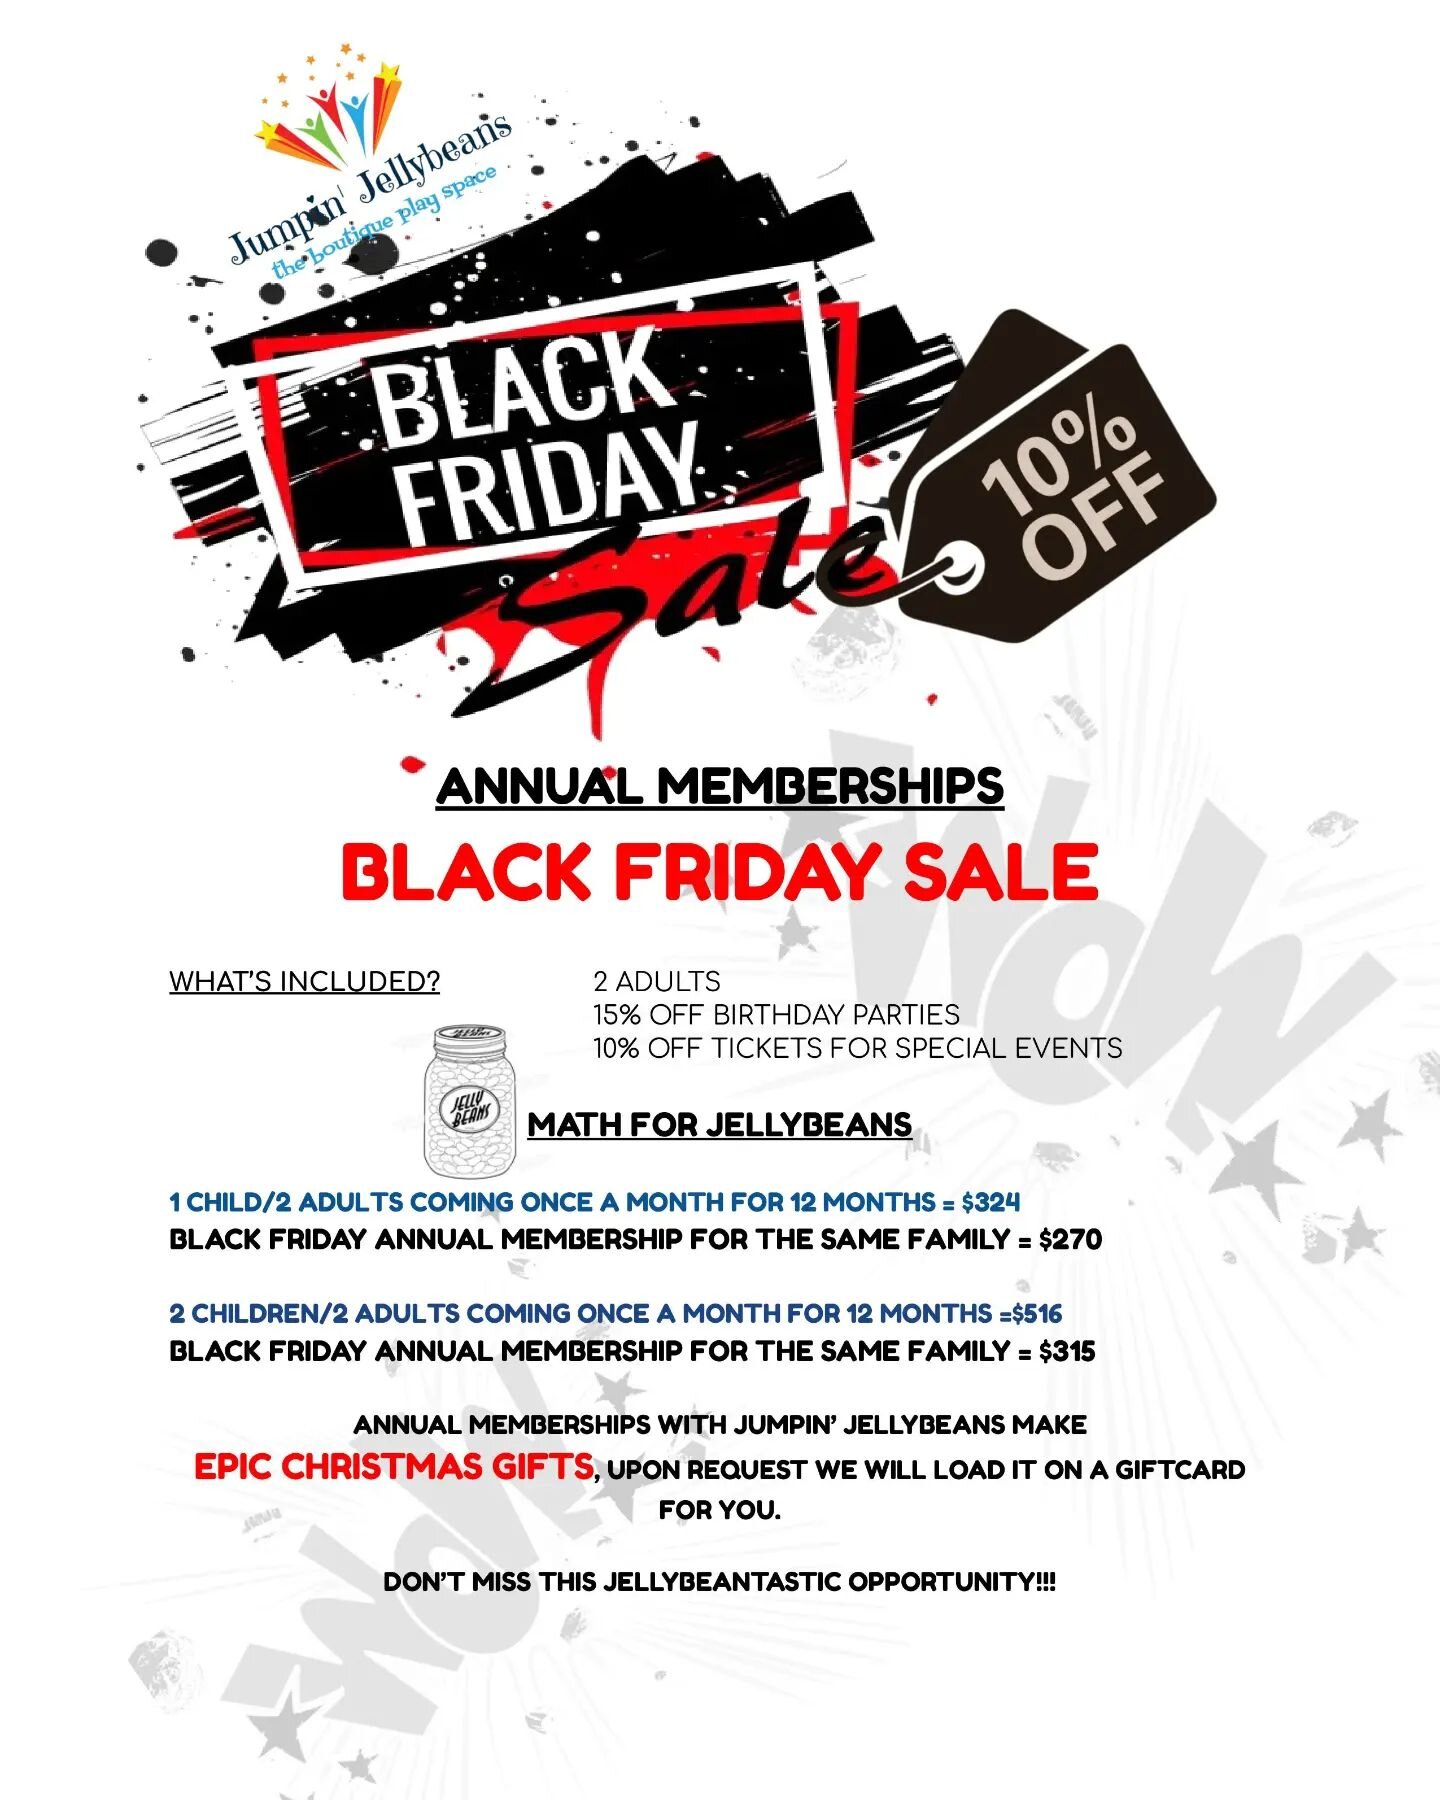 Tis the season for gift givin'! Why not give a gift that keeps on giving a membership to Jumpin' Jellybeans! We are having our black Friday sale on Memberships starting Friday! 

We are also hosting our 2-hour Drop and Shop all day Friday! Drop your 